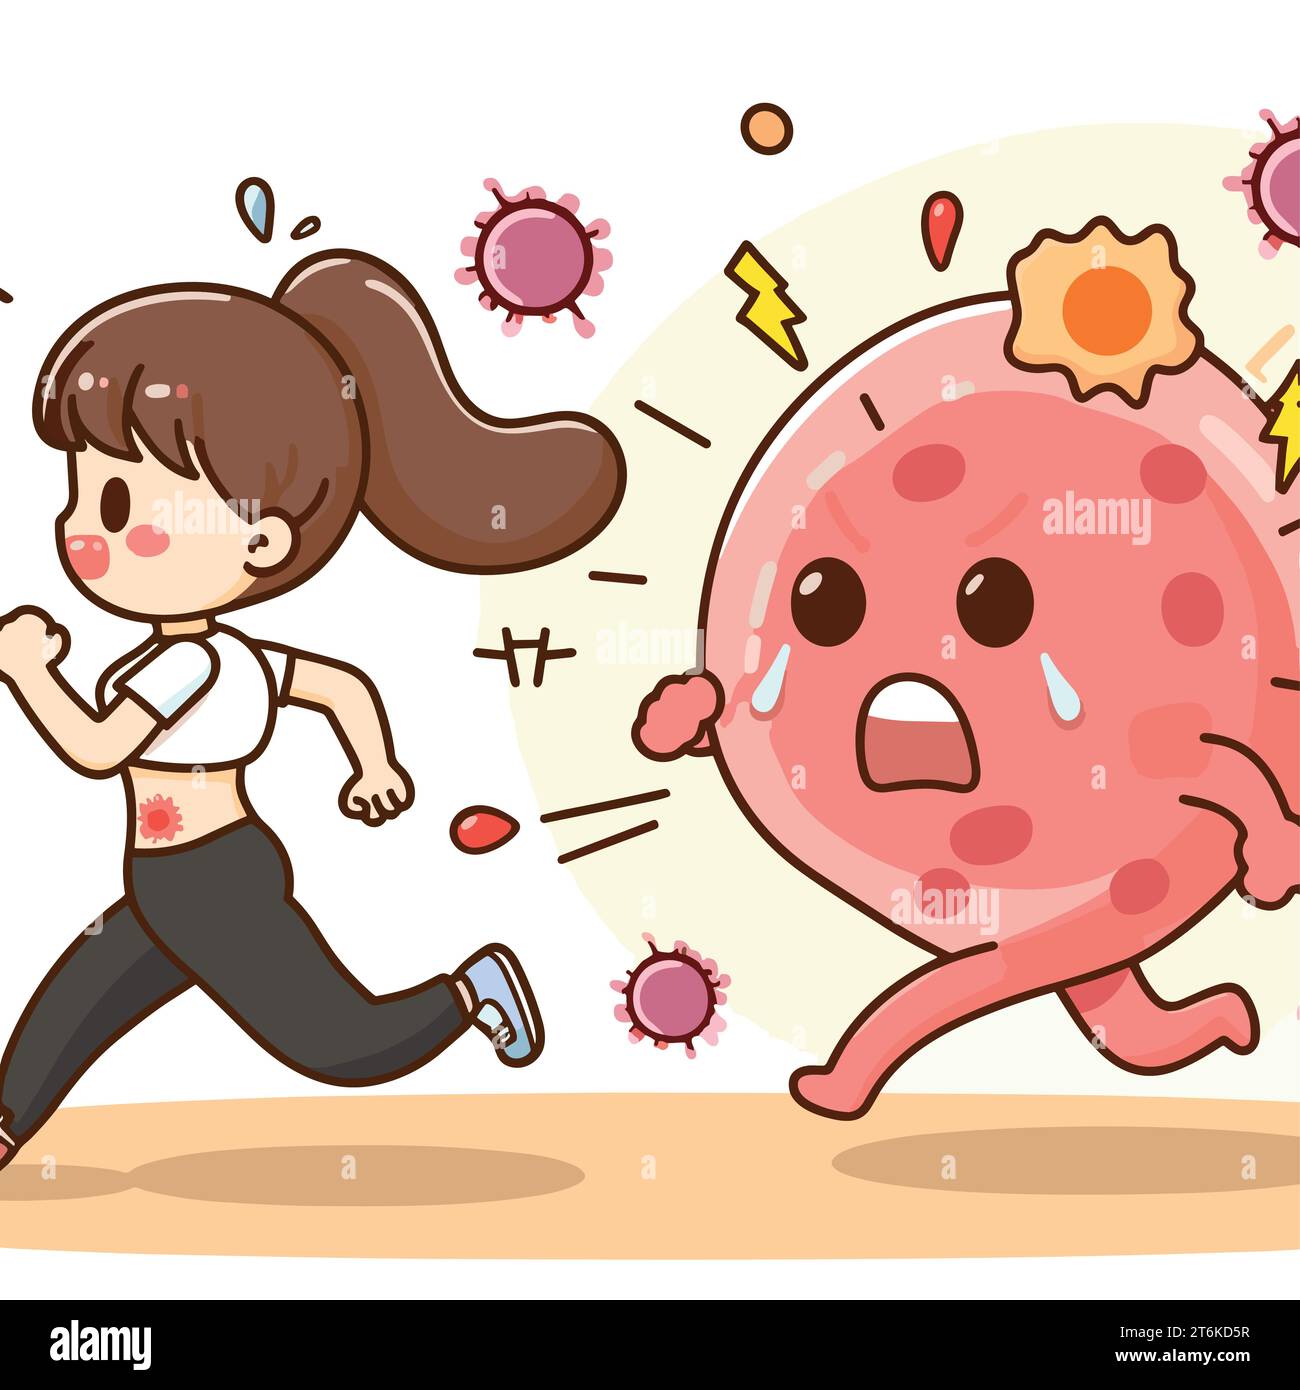 Girl running chased by germs battery fat cells Stock Vector